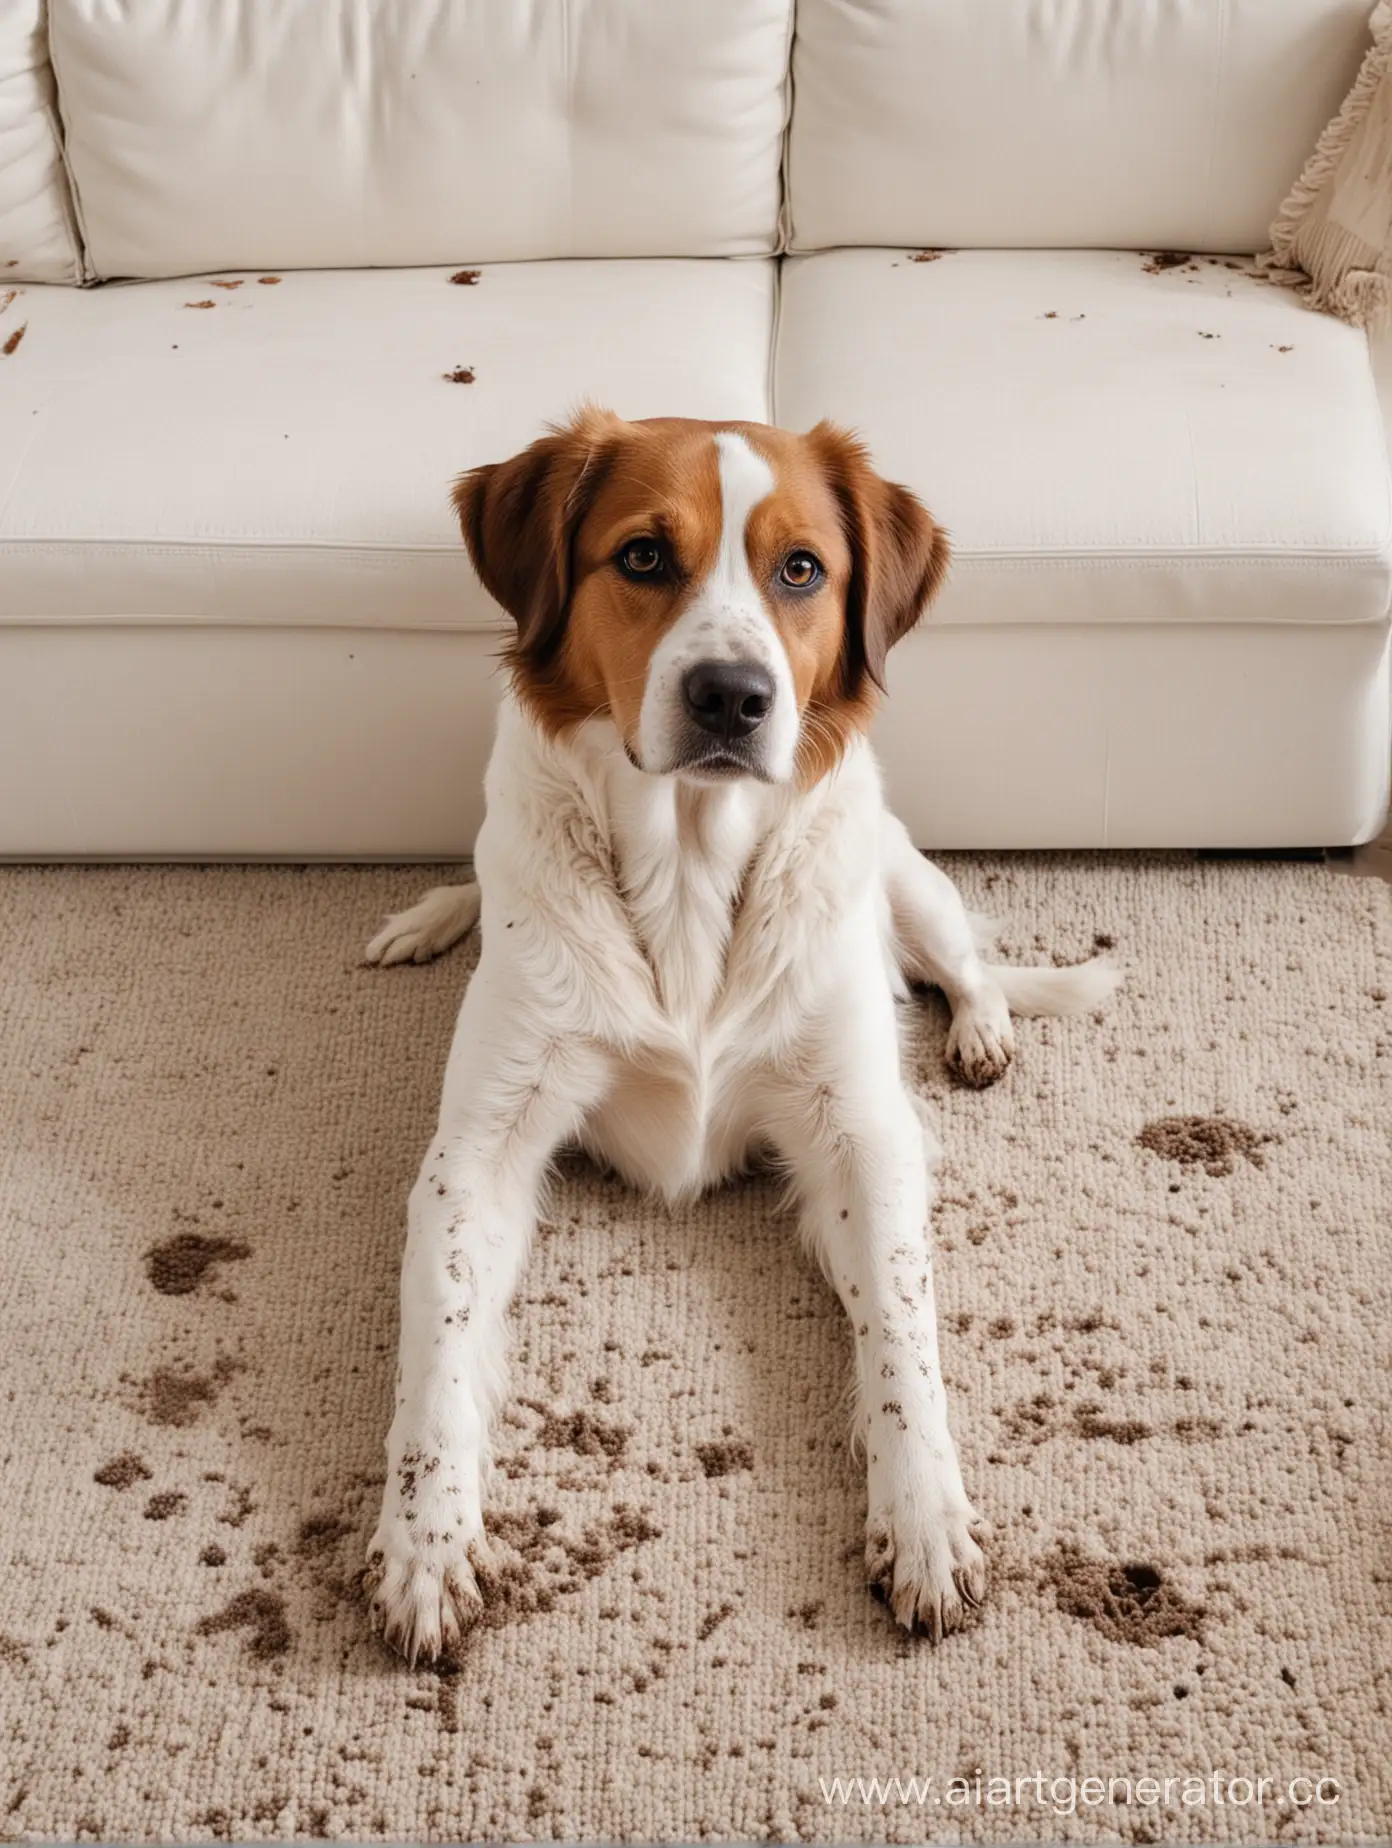 Guilty-Dog-on-White-Couch-Leaves-Paw-Prints-on-Rug